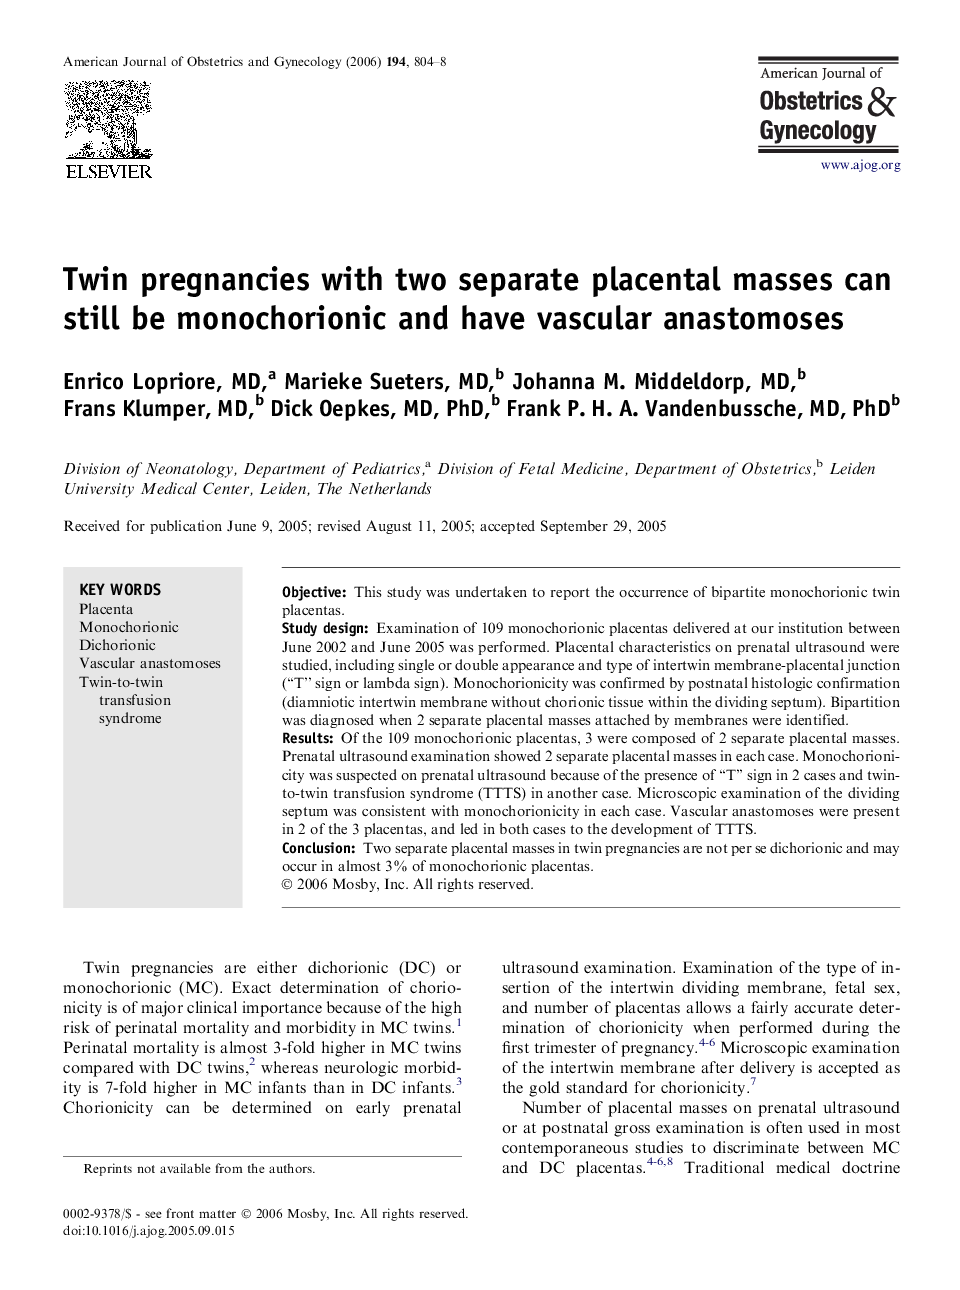 Twin pregnancies with two separate placental masses can still be monochorionic and have vascular anastomoses 